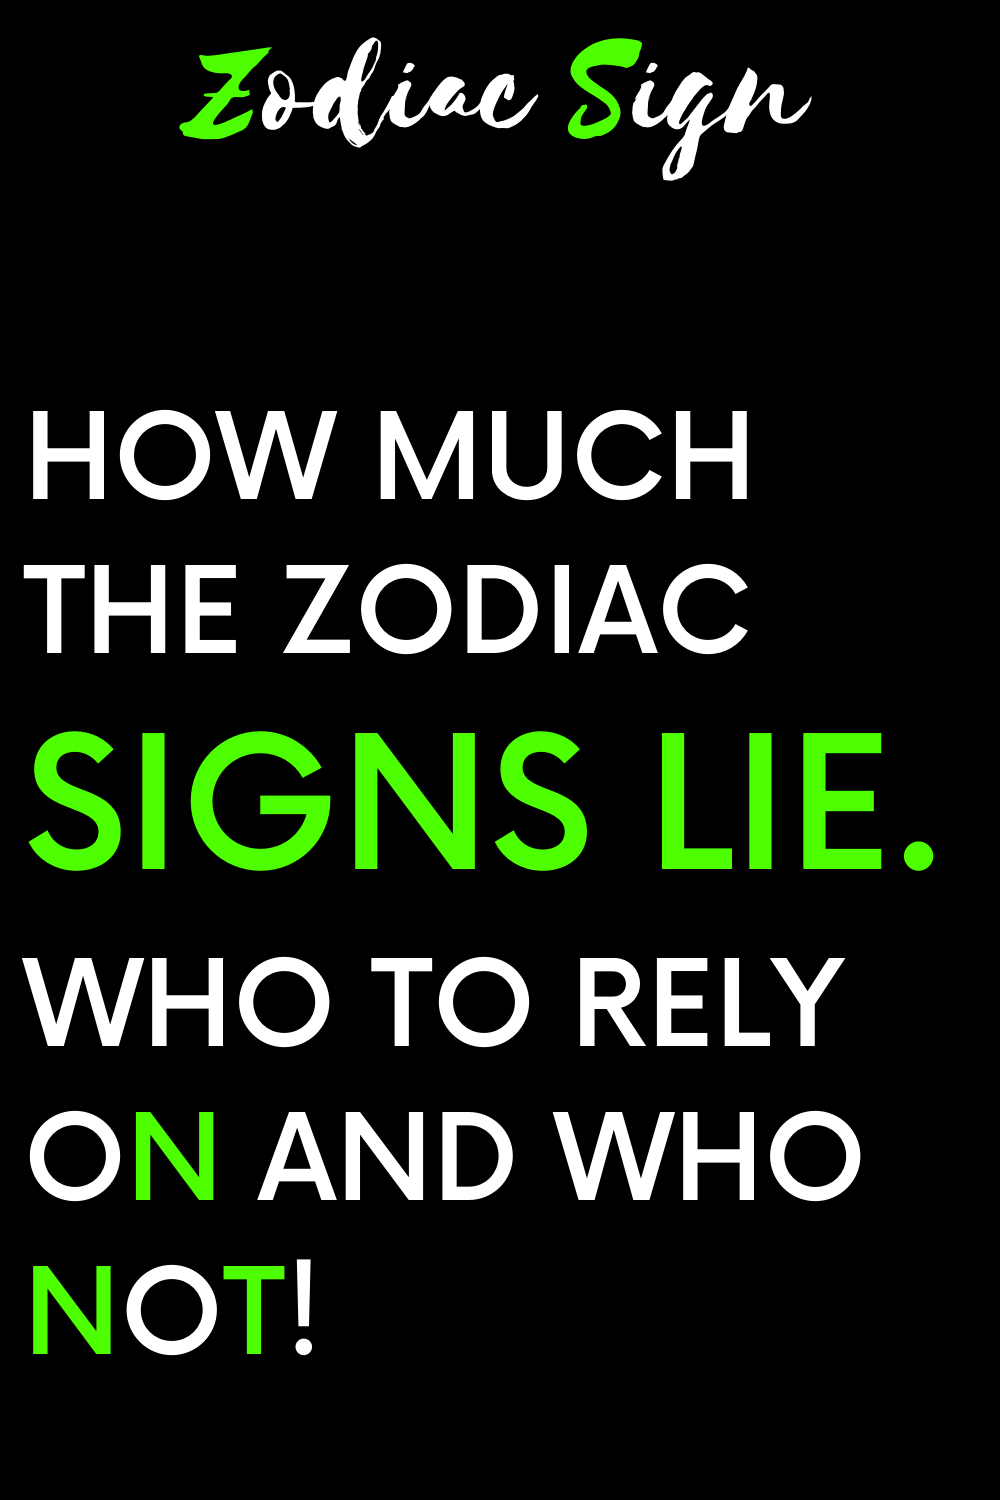 How much the zodiac signs lie. Who to rely on and who not!